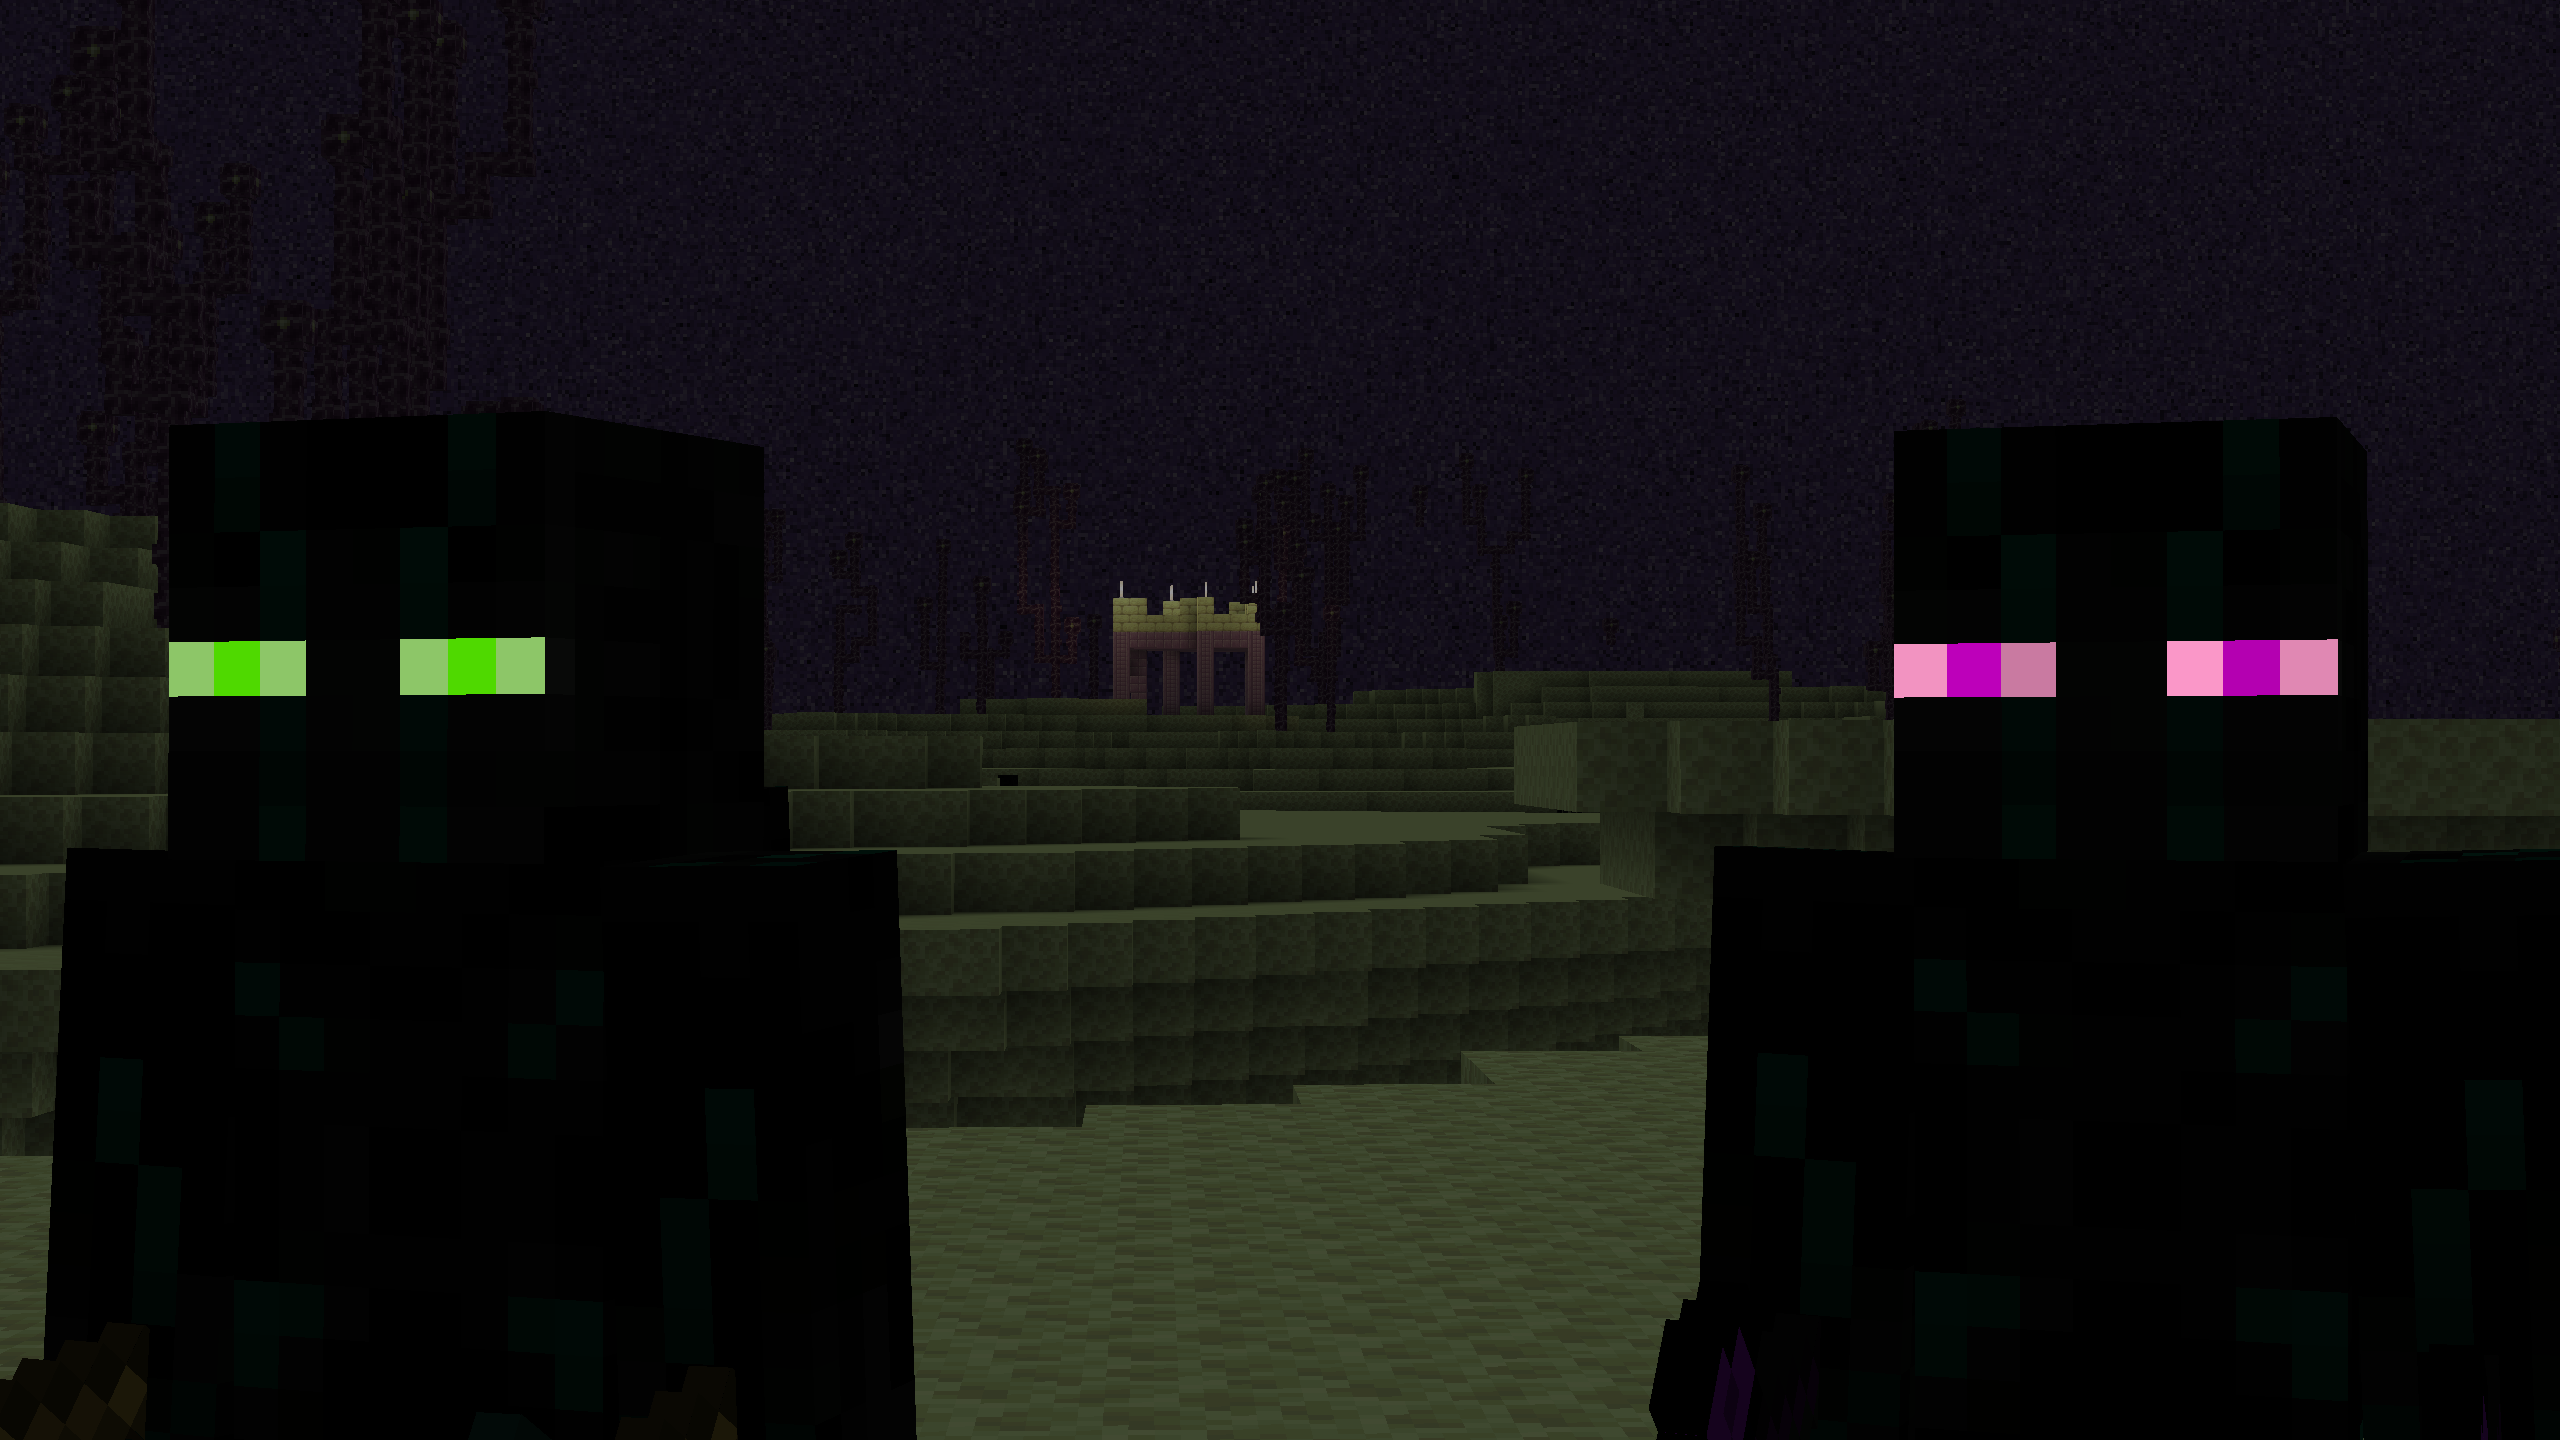 Two Endermen, one with pink/purple eyes and one with green eyes, with the End's natural biome behind them.